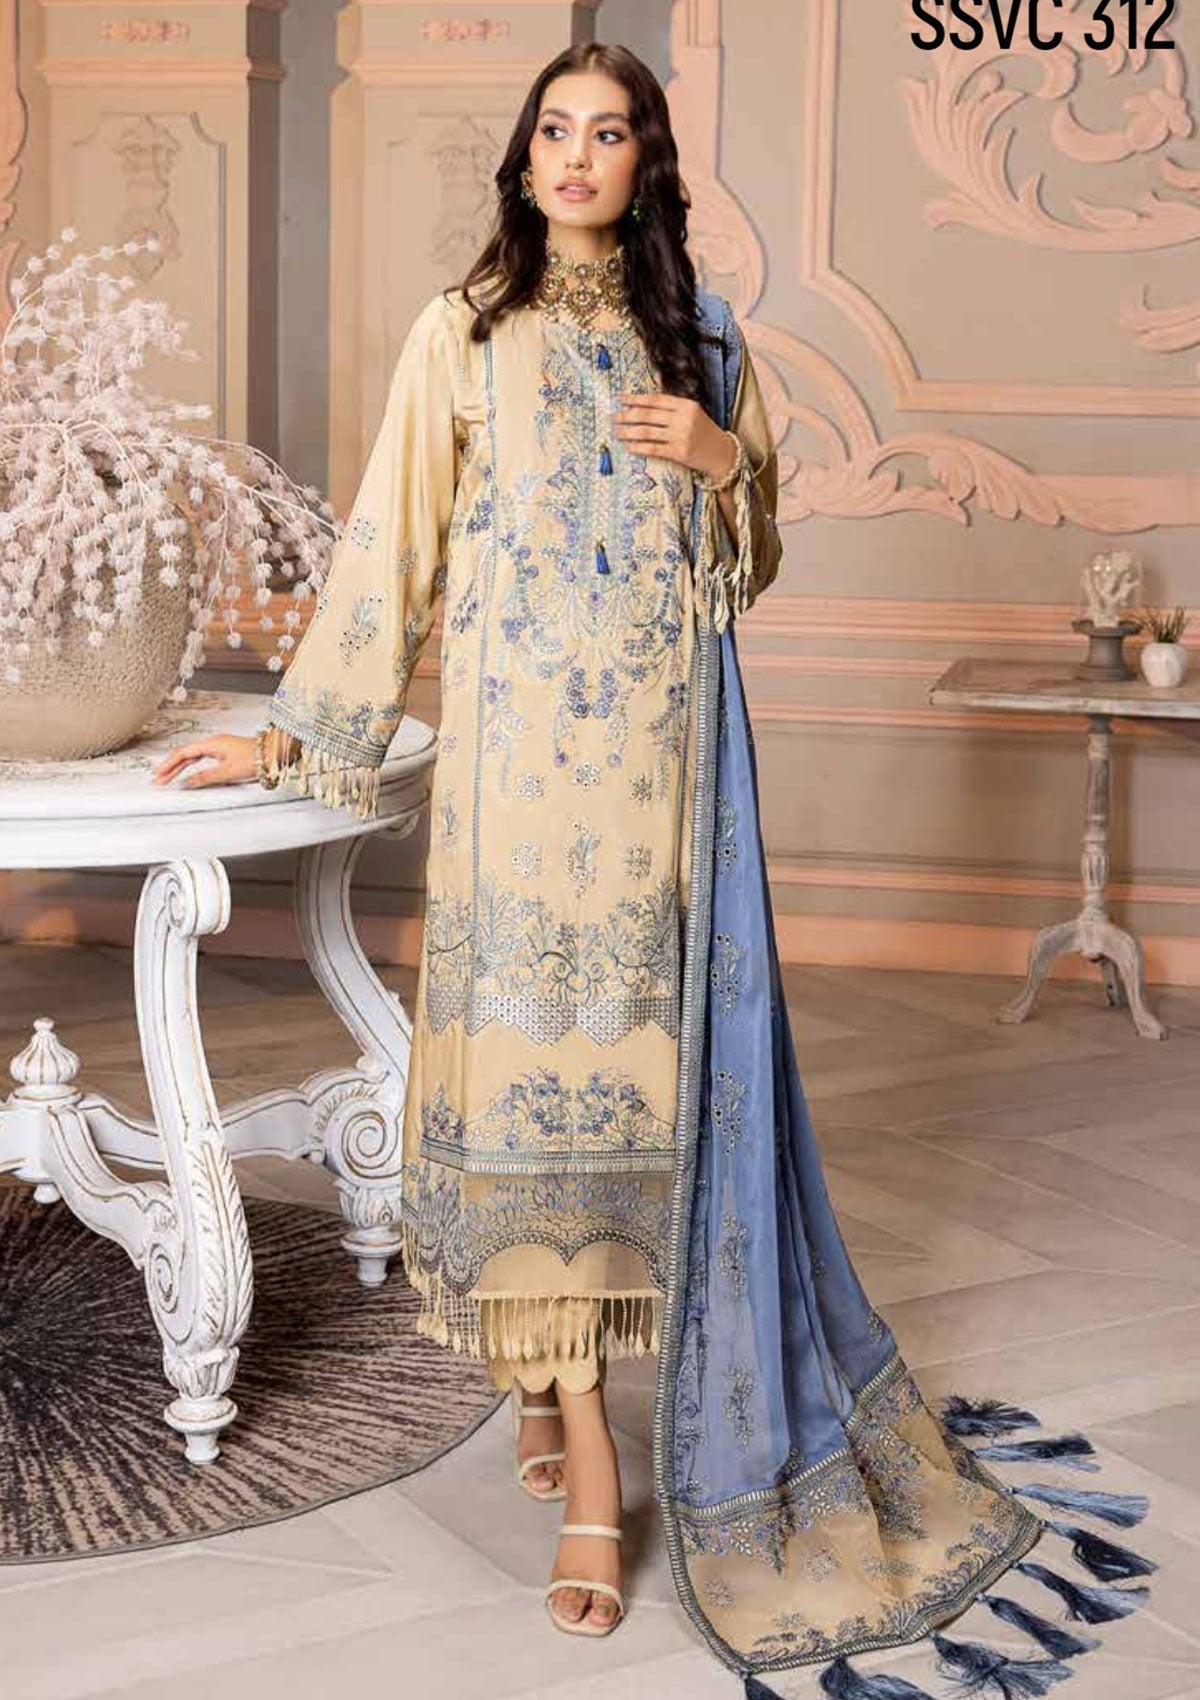 Winter Collection - Shaista - Viscose - V02 - D#312 available at Saleem Fabrics Traditions